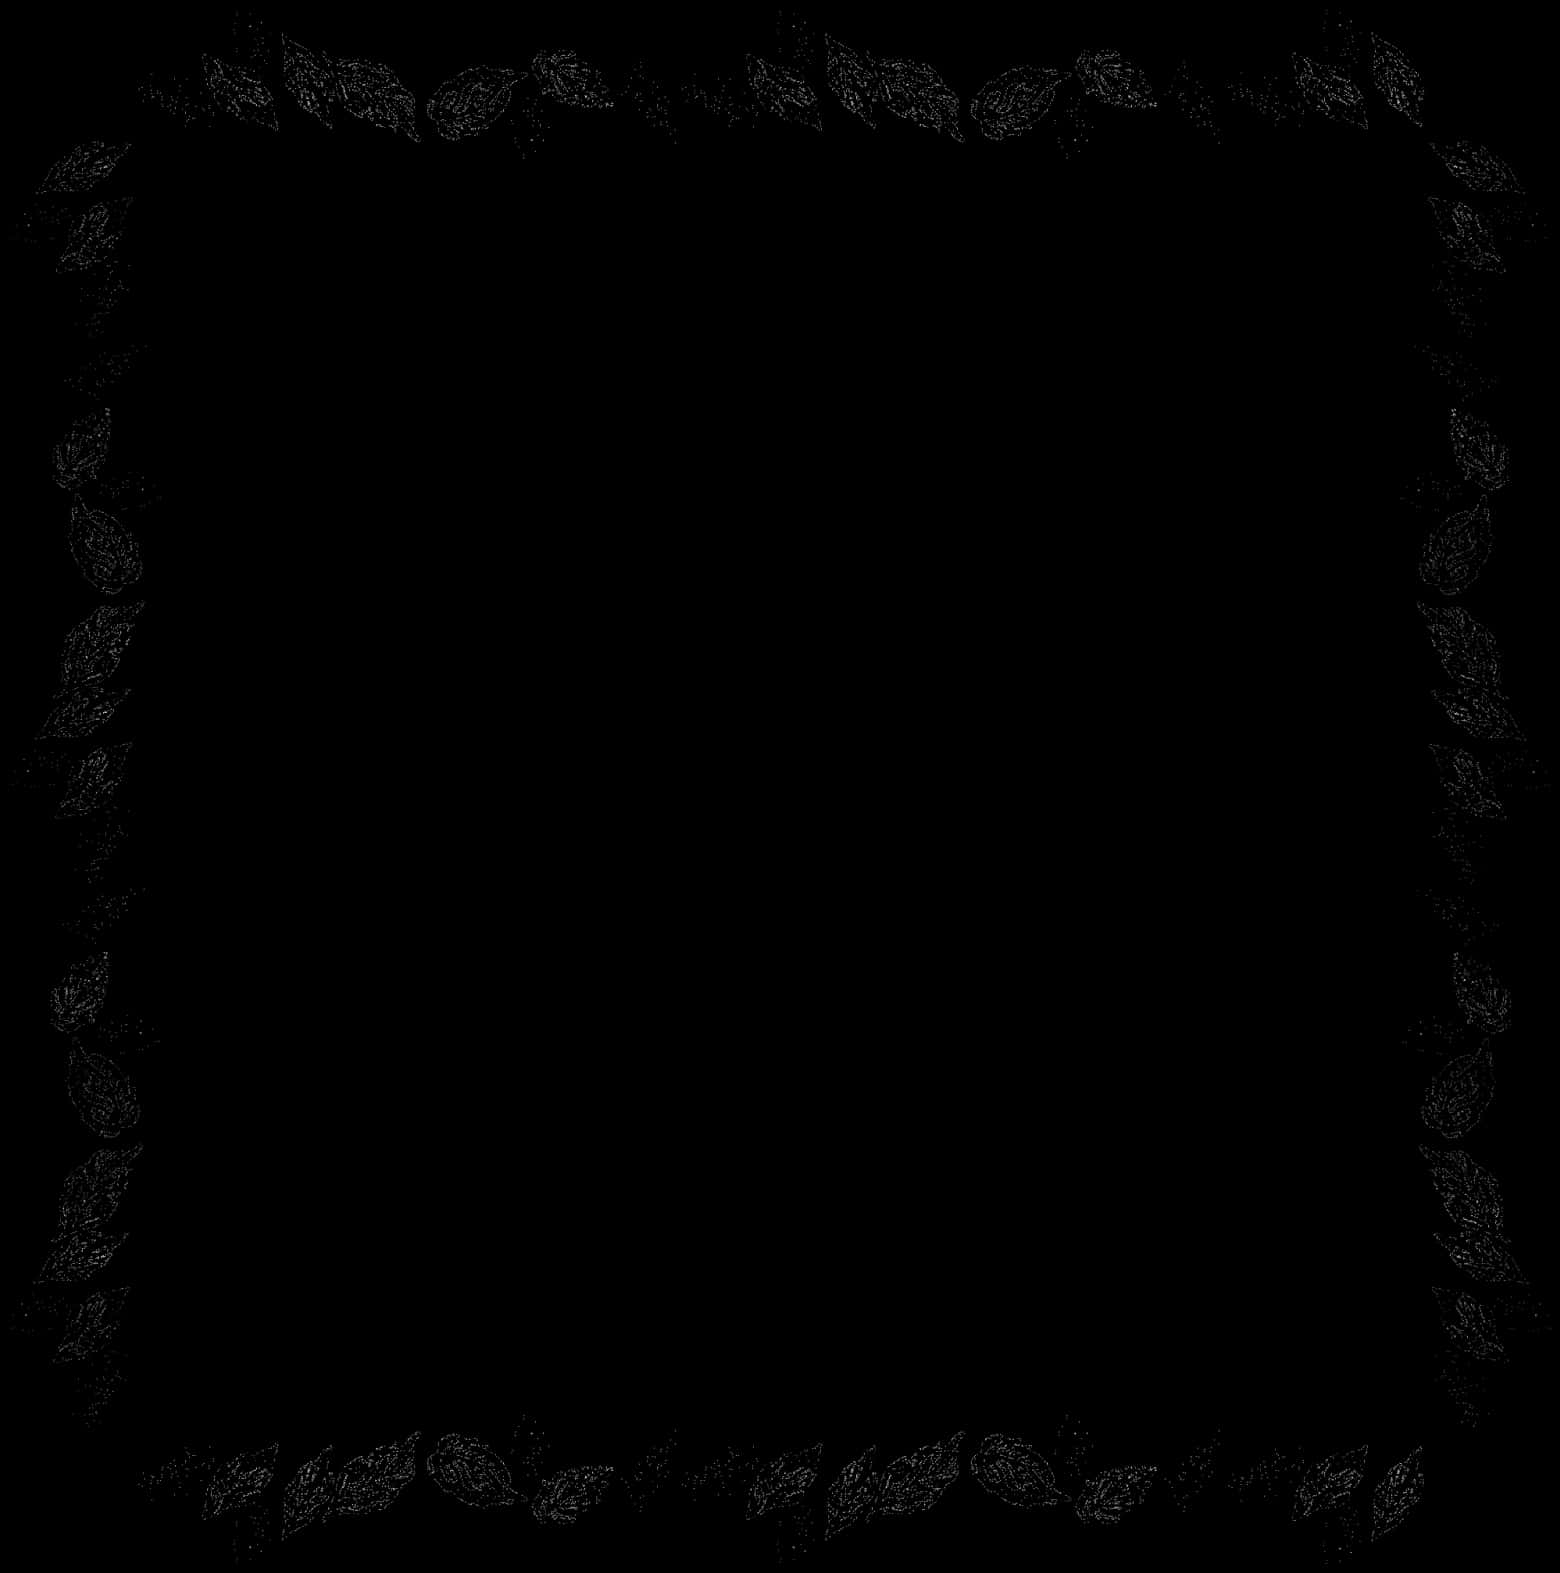 Free Digital Frames Leaves Border Stationary Designs - Fall Border Black And White, Hd Png Download